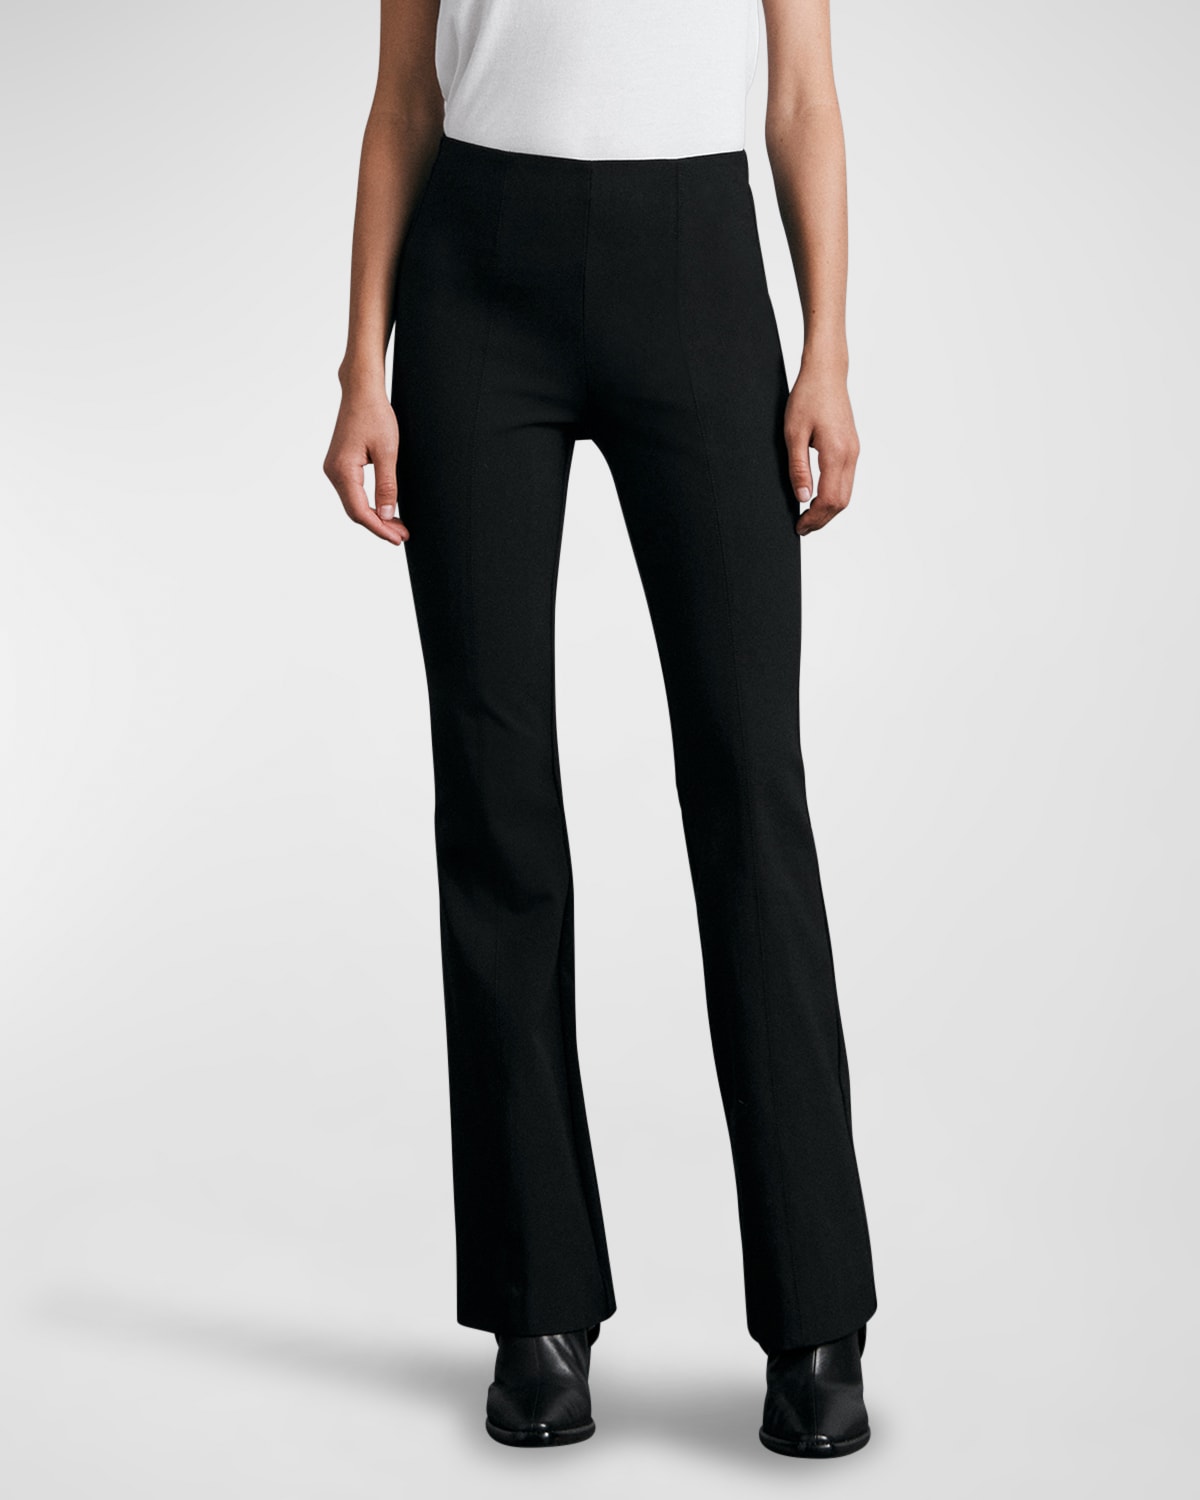 Tory Burch Cropped Pintuck Flare Pants | Neiman Marcus